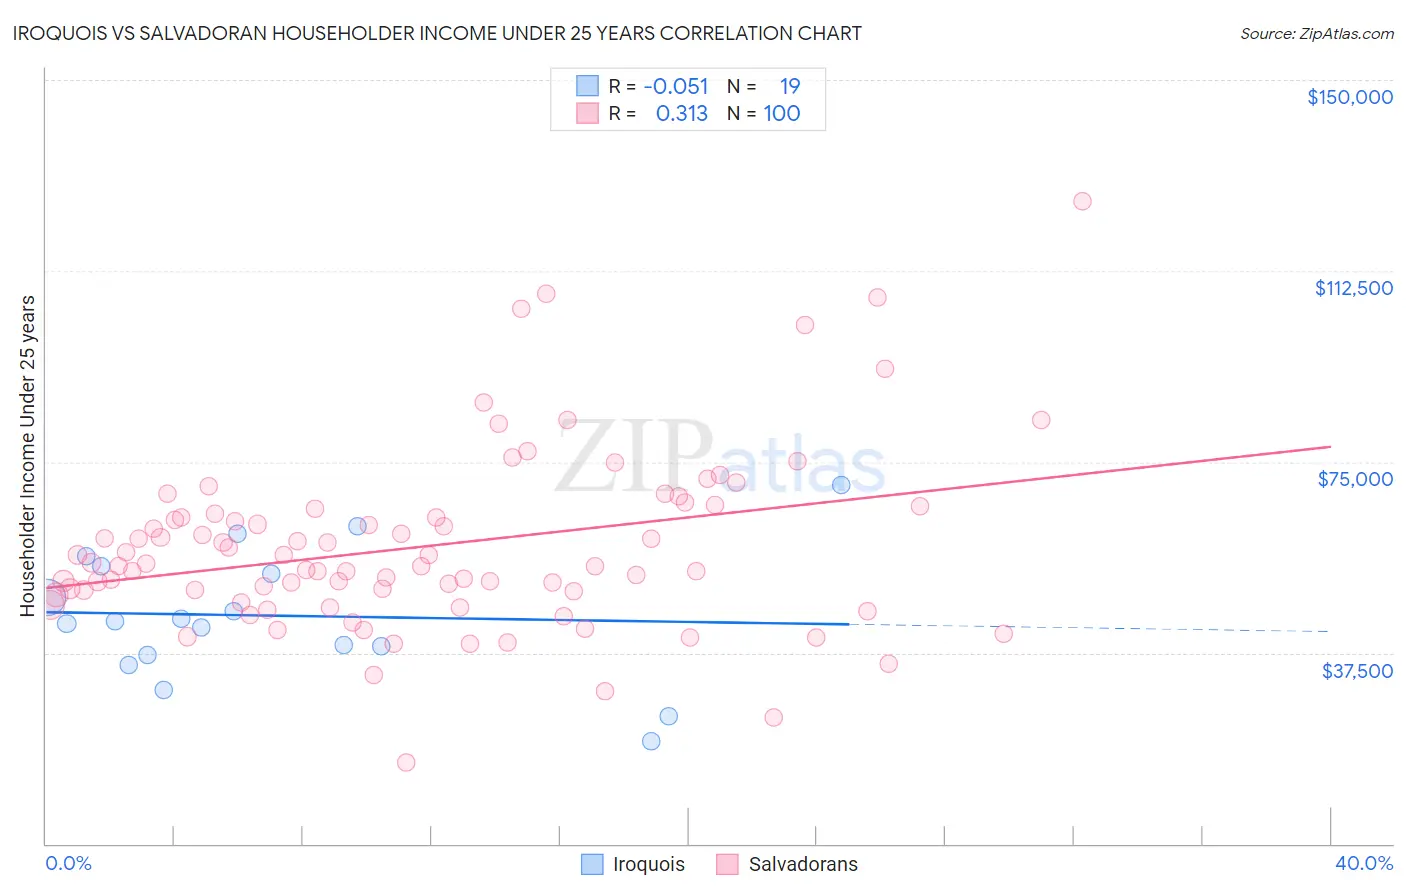 Iroquois vs Salvadoran Householder Income Under 25 years